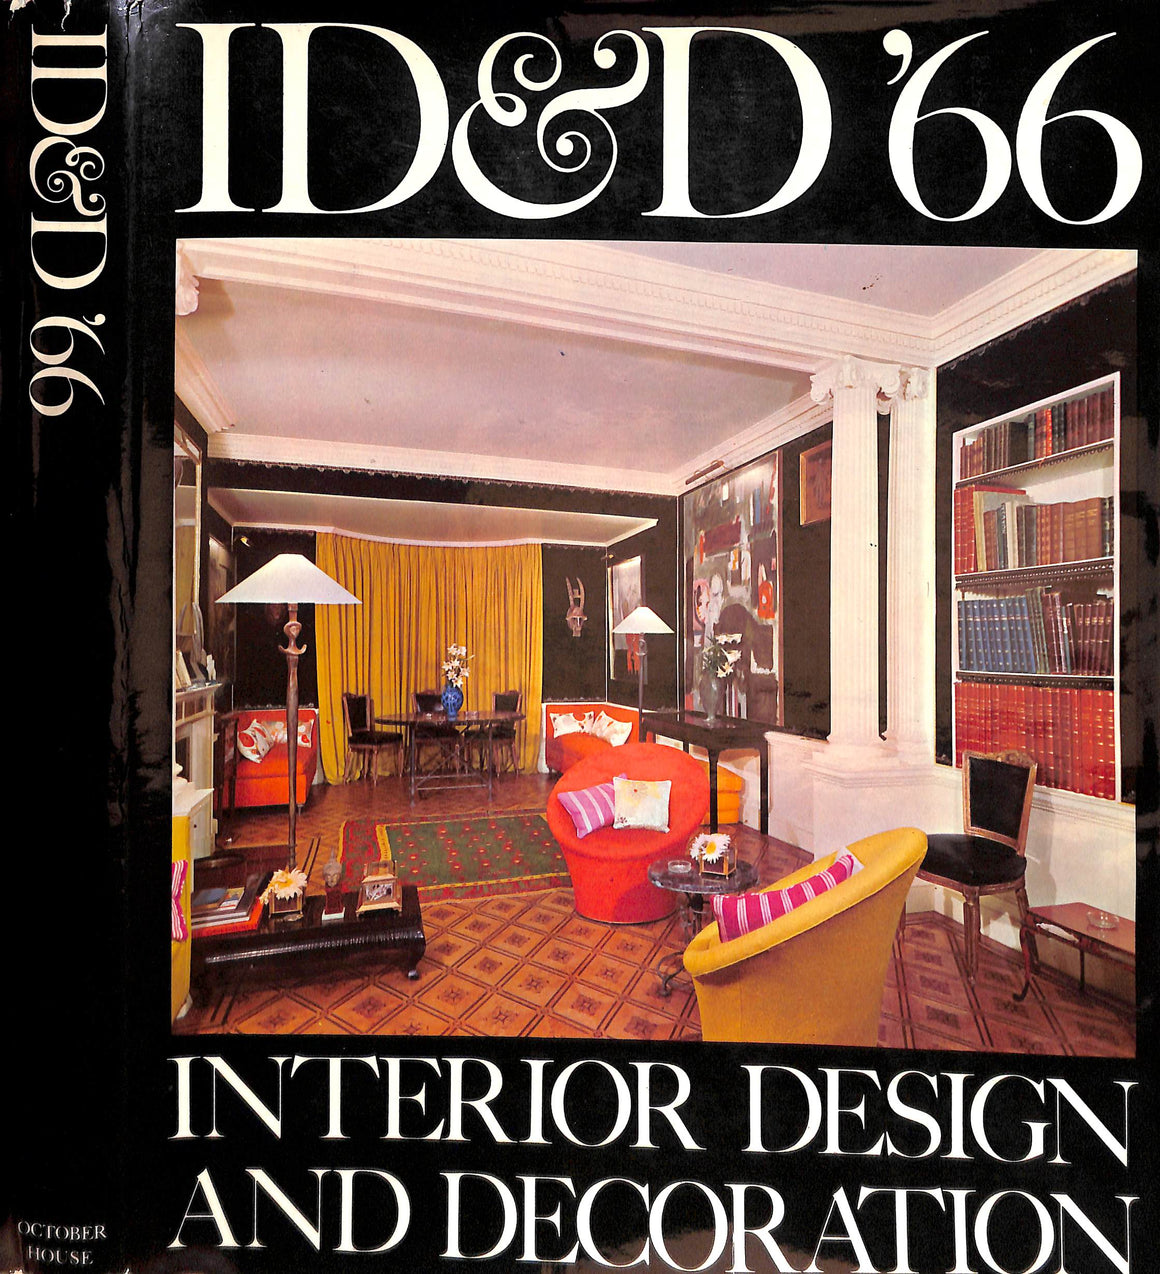 "ID&D '66: Interior Design And Decoration" 1965 INCHBALD, Jacqueline [edited by]